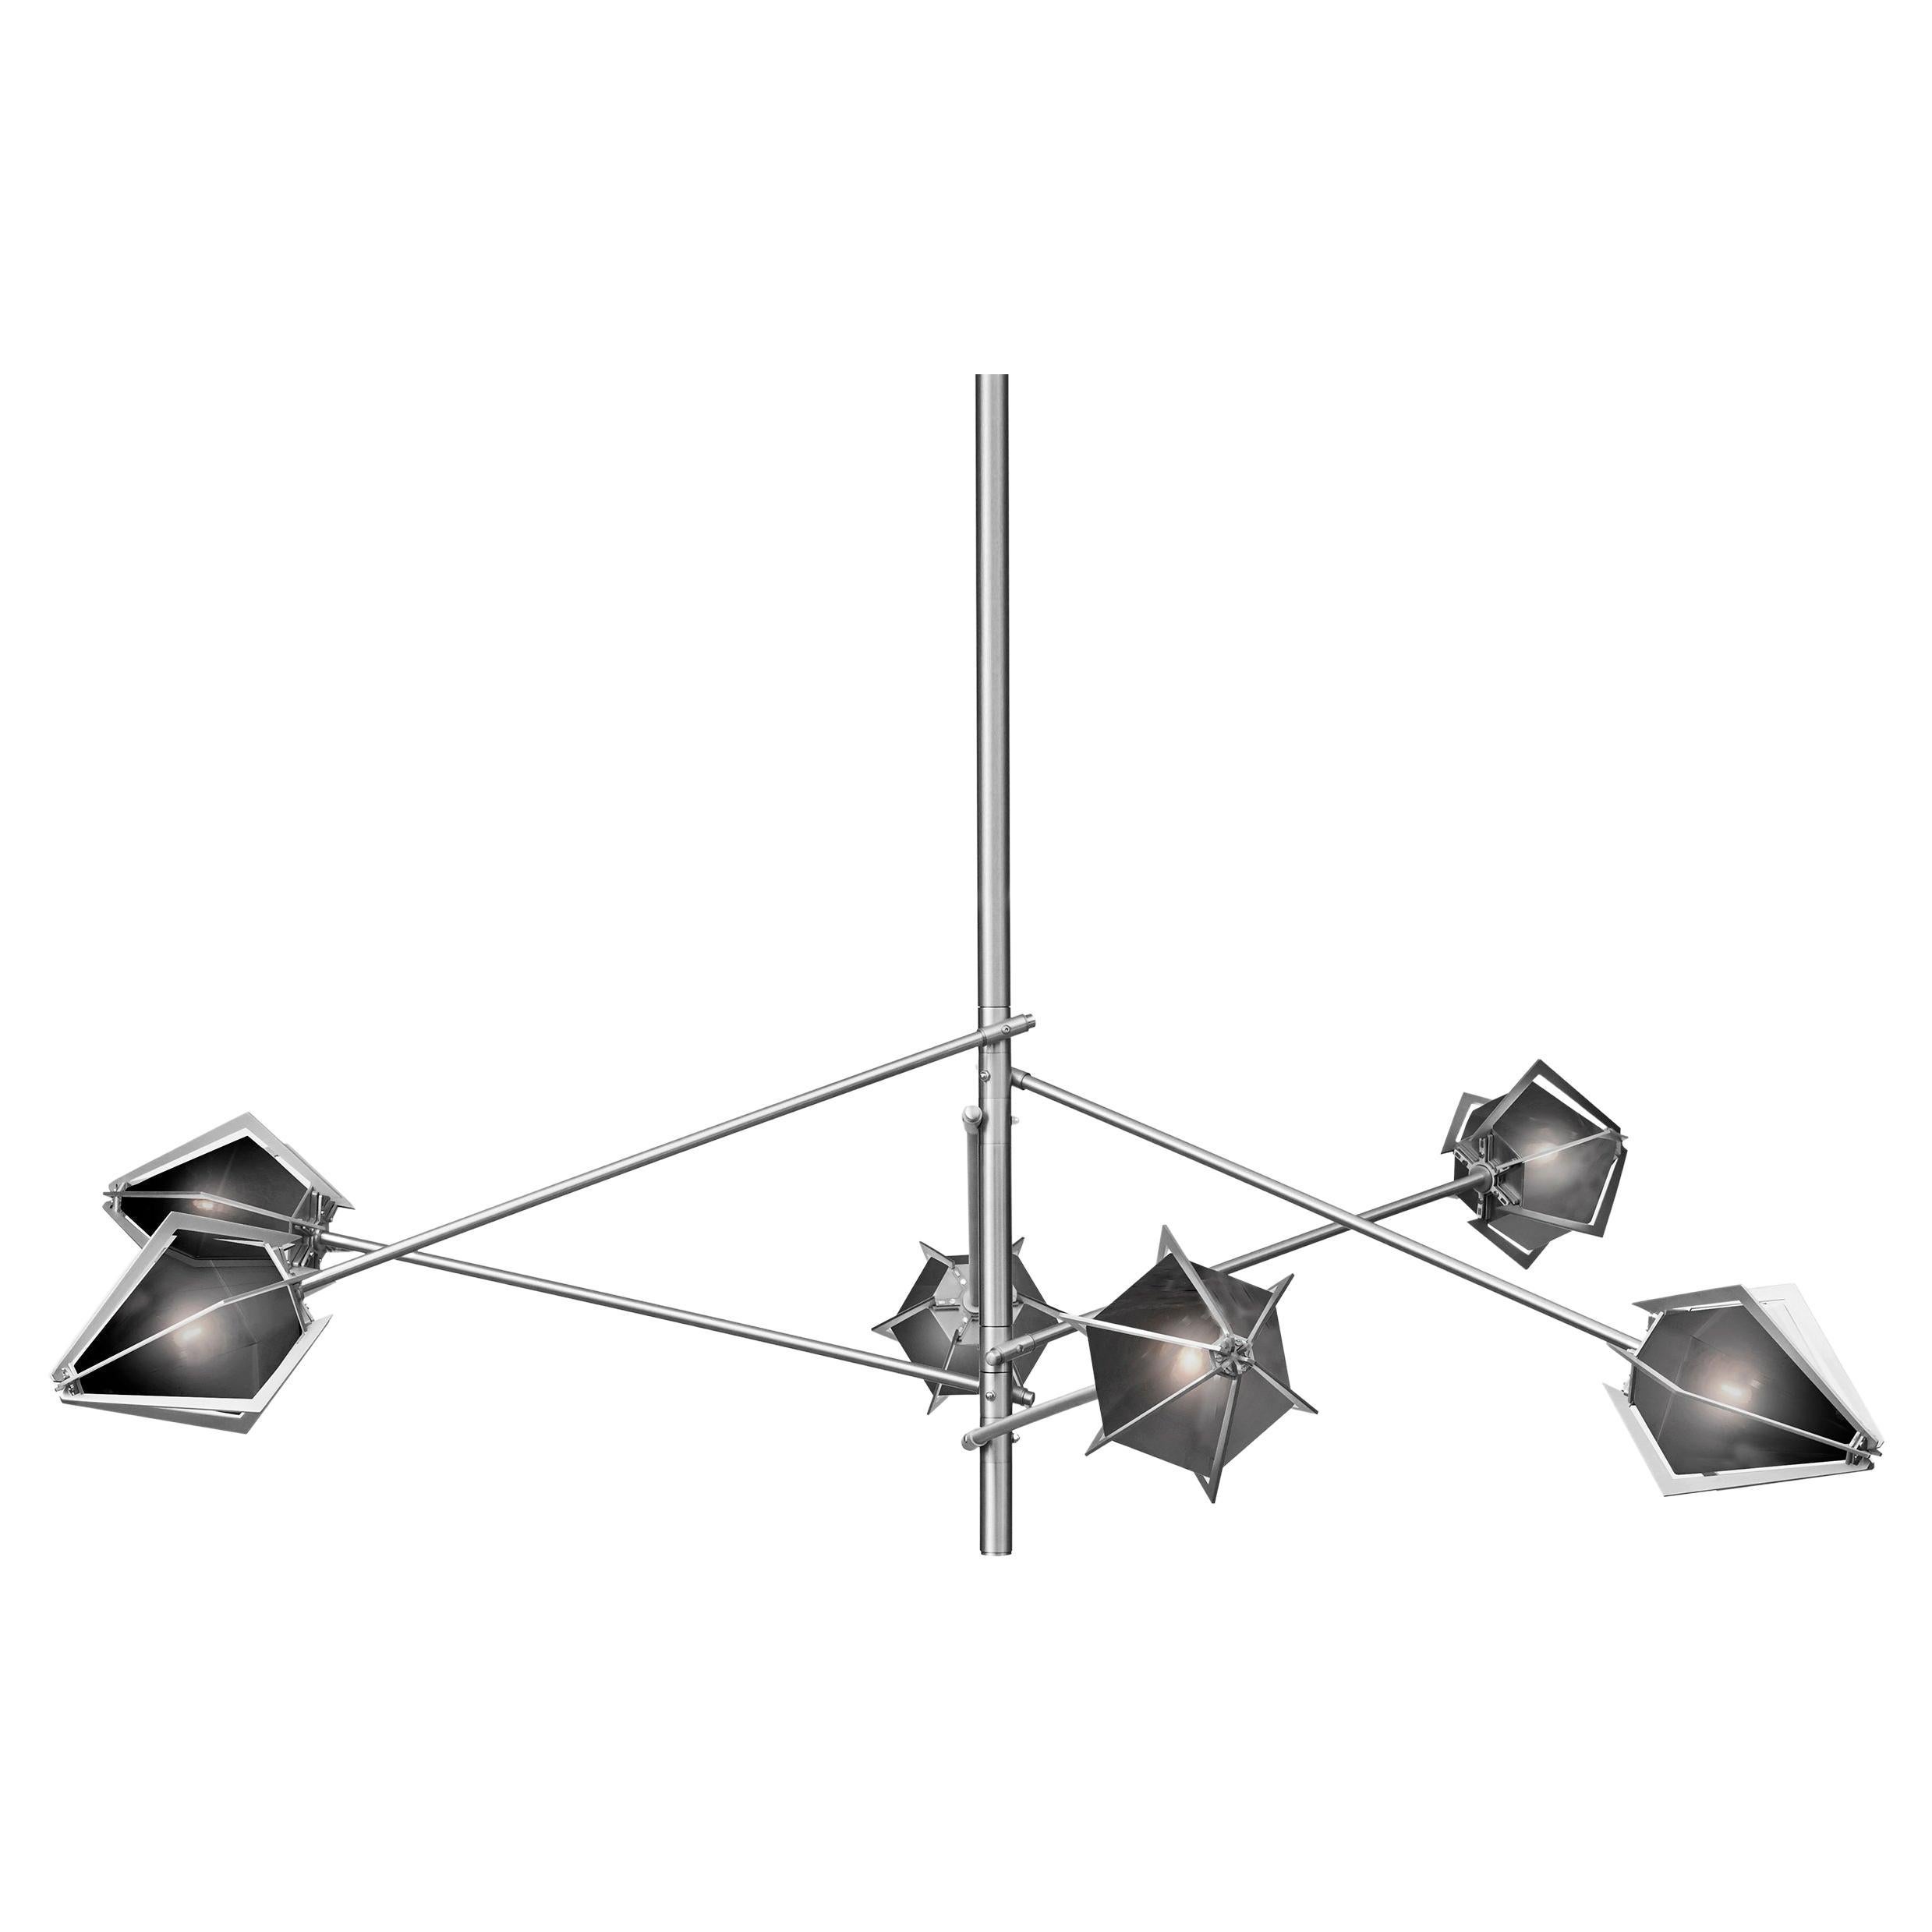 Harlow Spoke Chandelier Large in Satin Nickel and Smoked Gray Glass For Sale